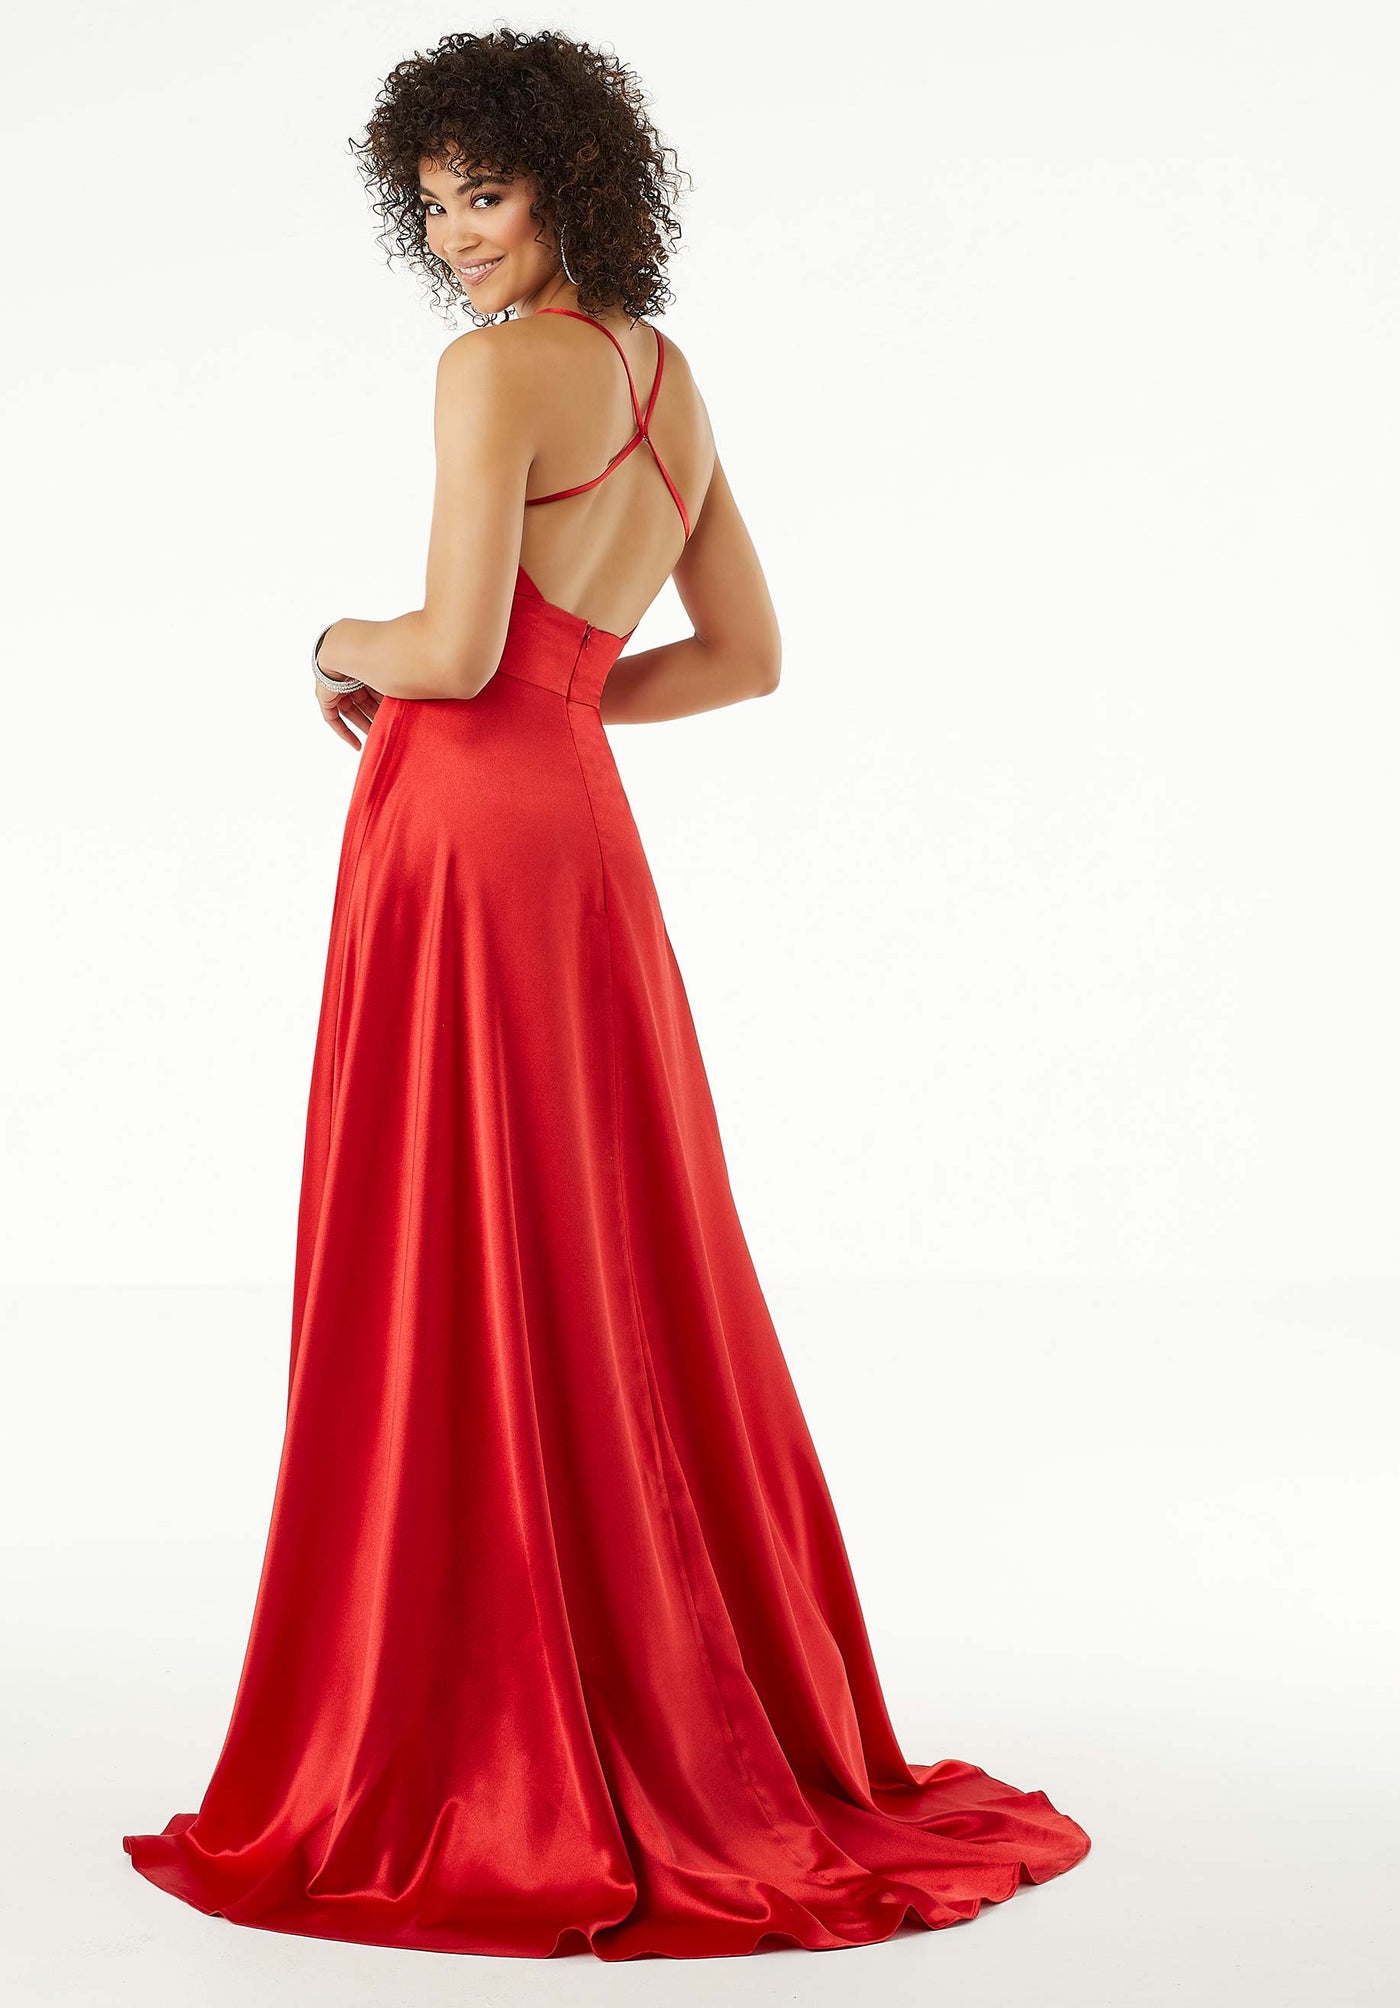 Mori Lee - 45075 Scoop Neck Wrap High Slit Satin Gown in Red